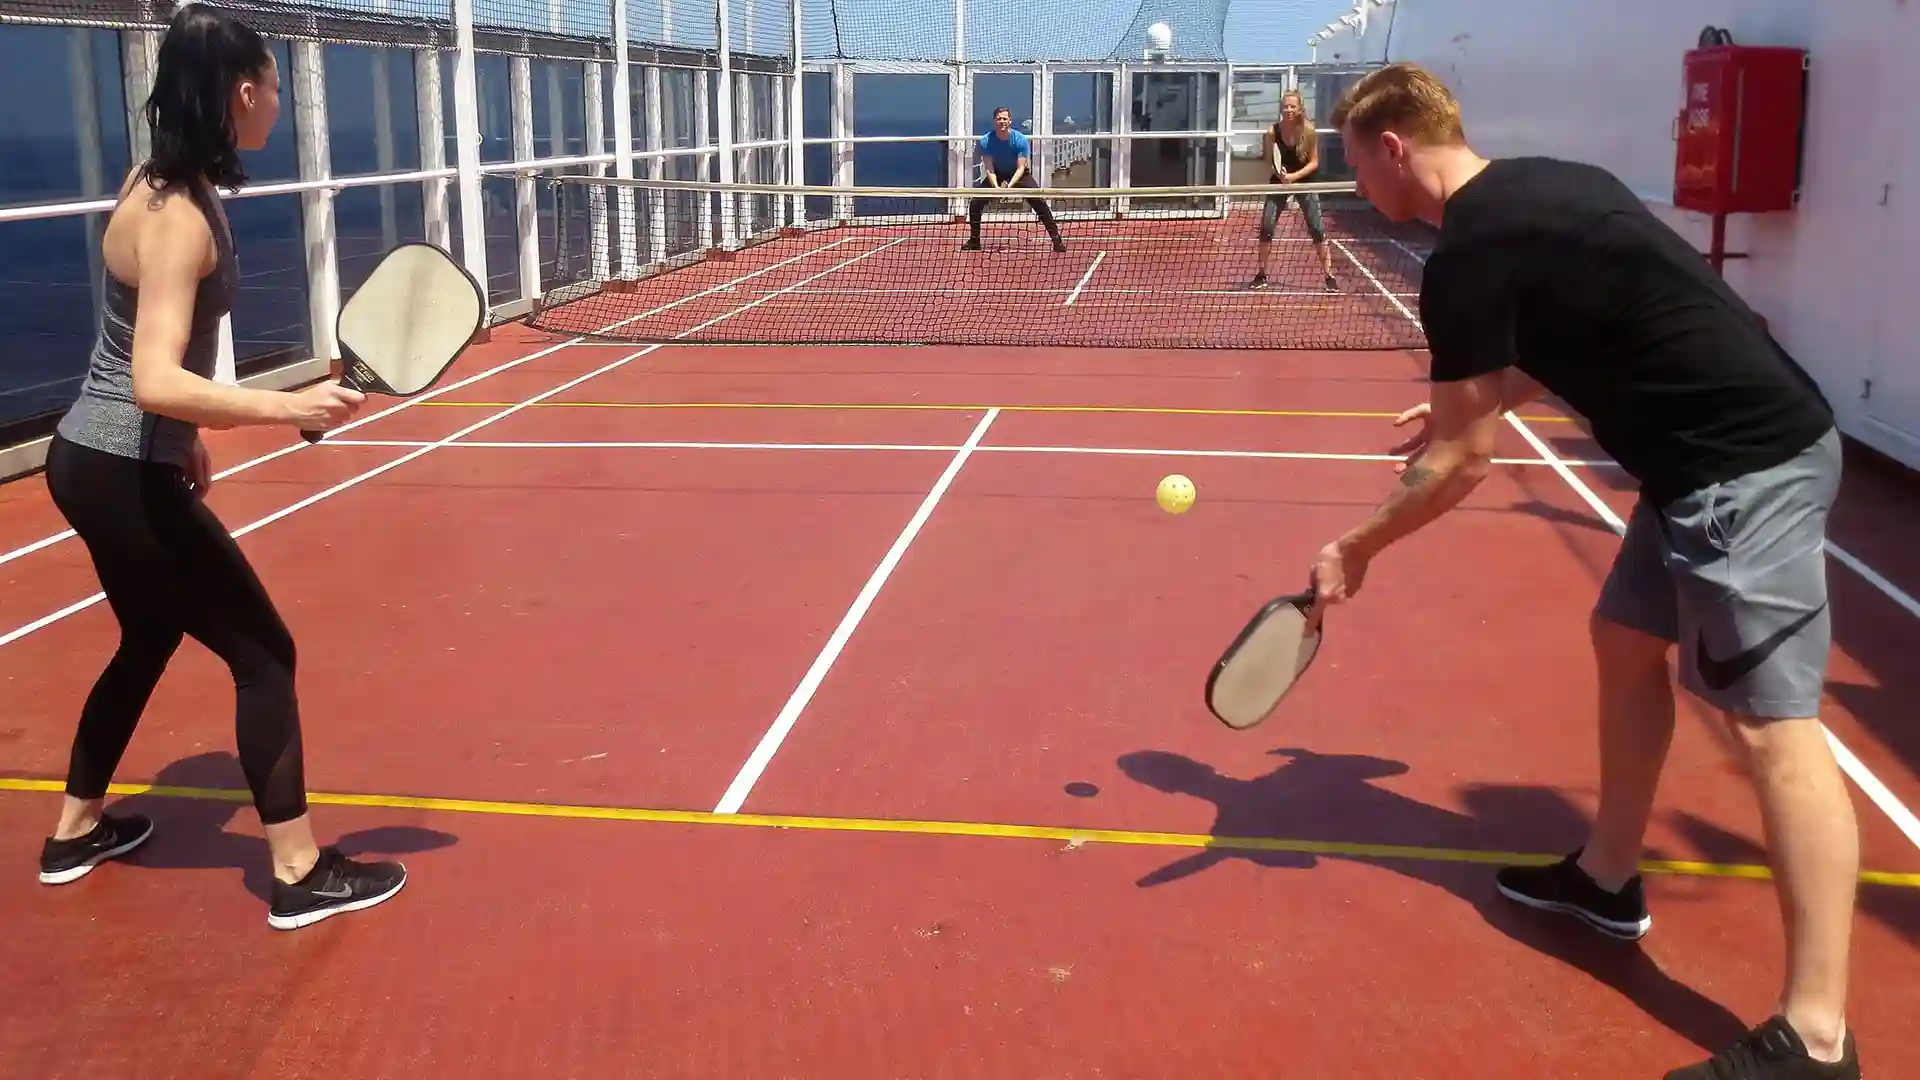 People playing pickleball on Holland America Line cruise ship.